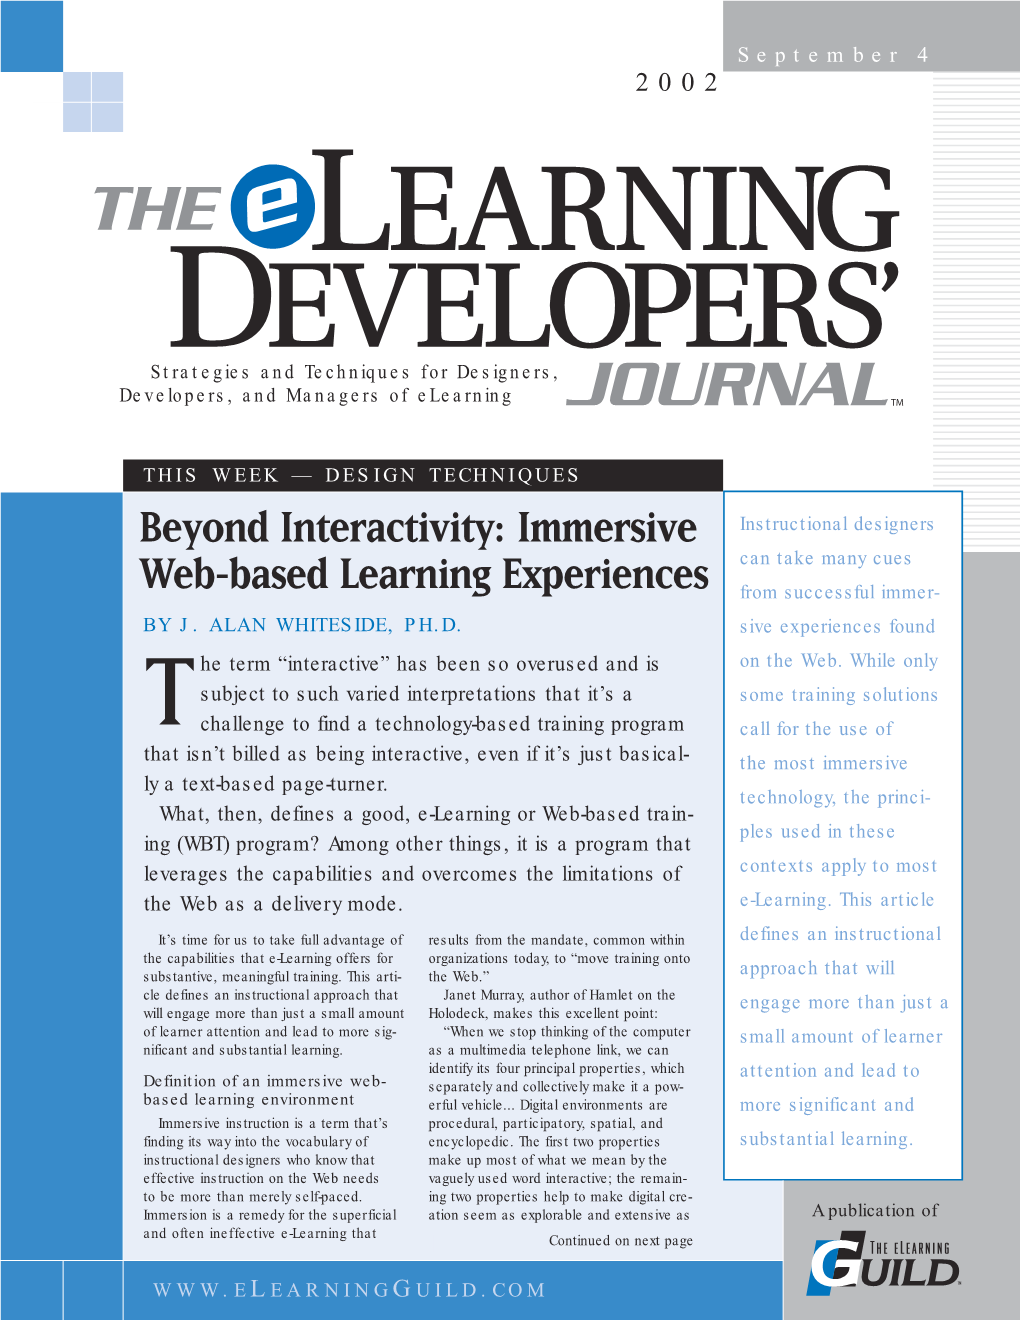 Immersive Web-Based Learning Experiences